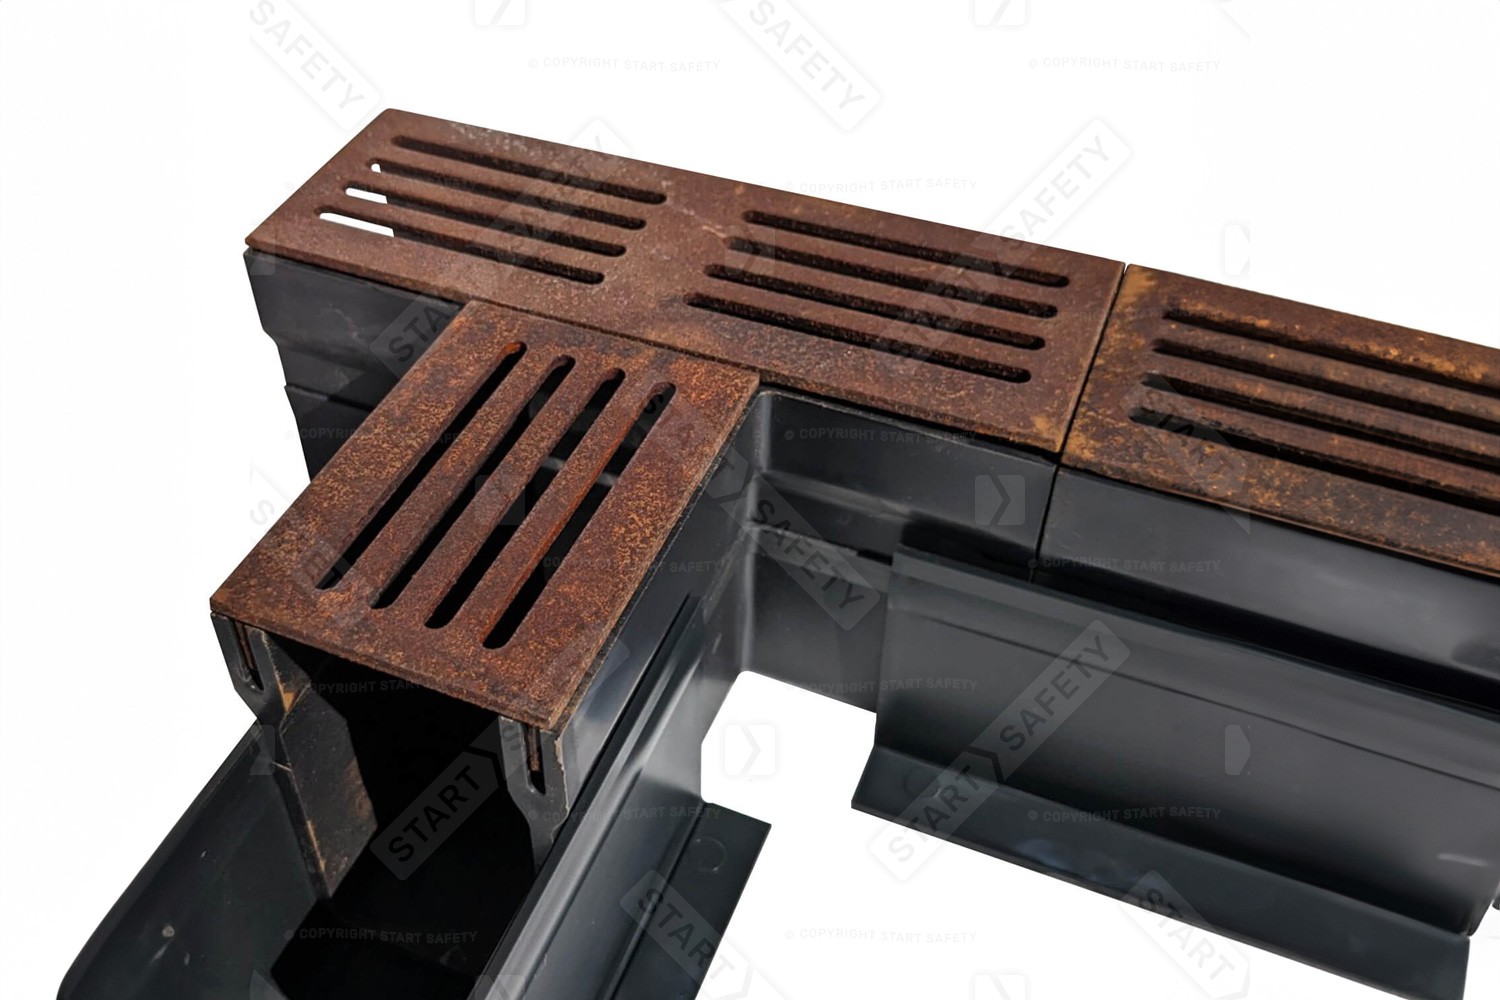 Installation of an Alusthetic Threshold Drainage Channel in Corten